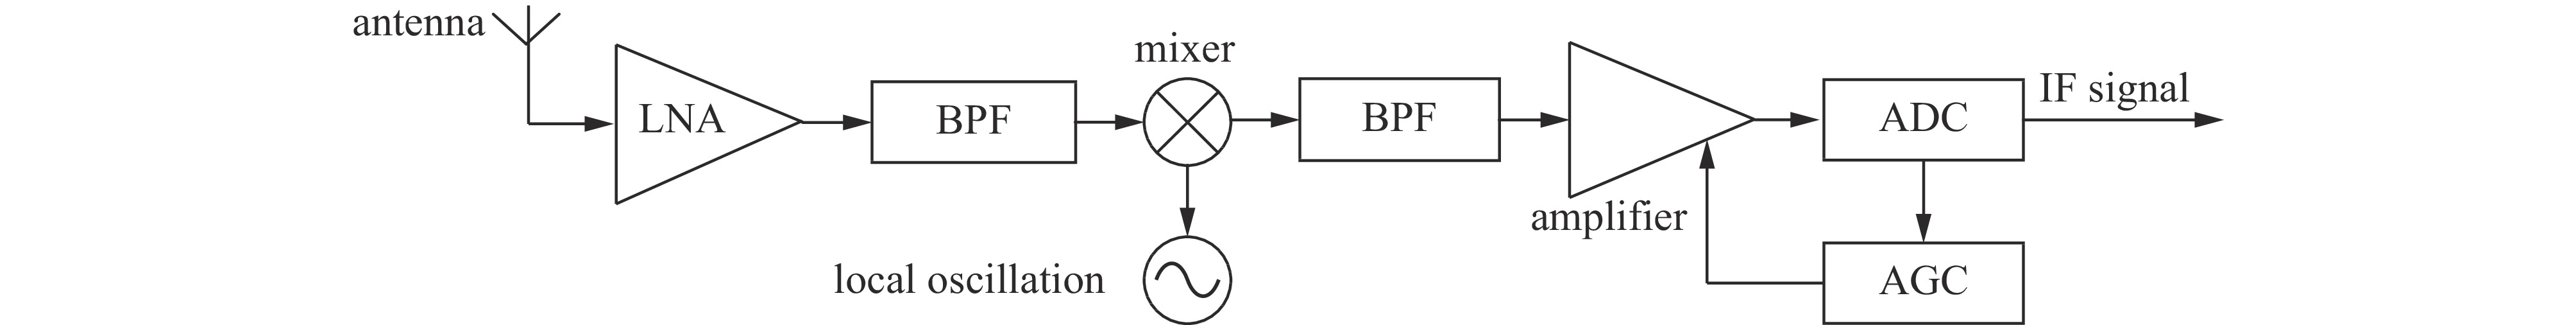 Block diagram of the RF front-end of the navigation receiver